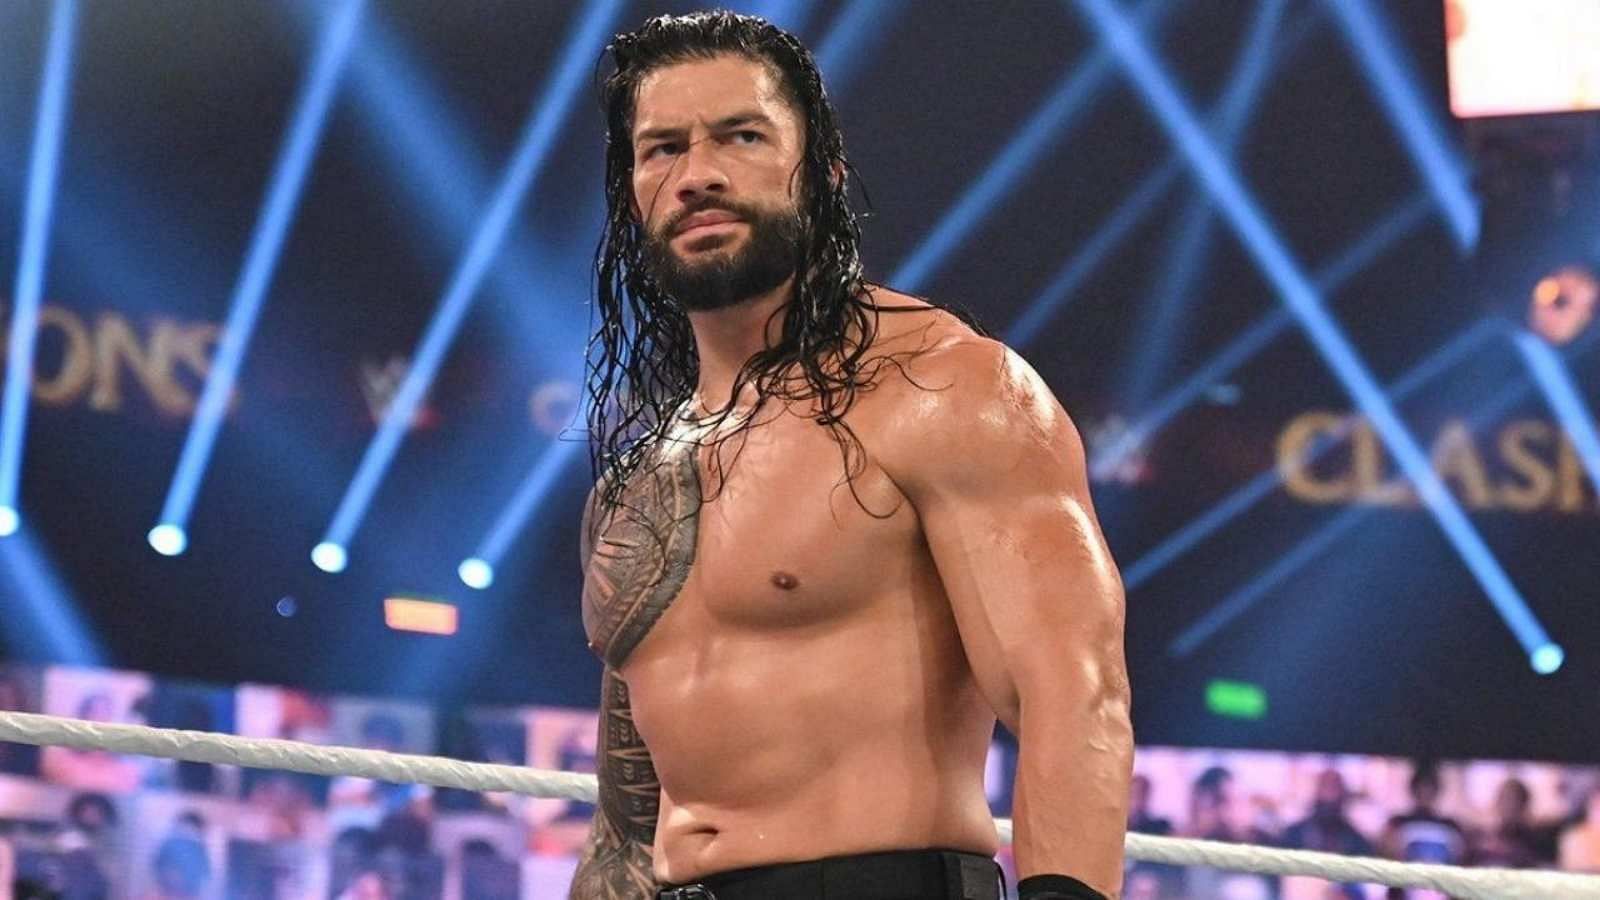 Reigns has been at the top as a good guy and as a bad one